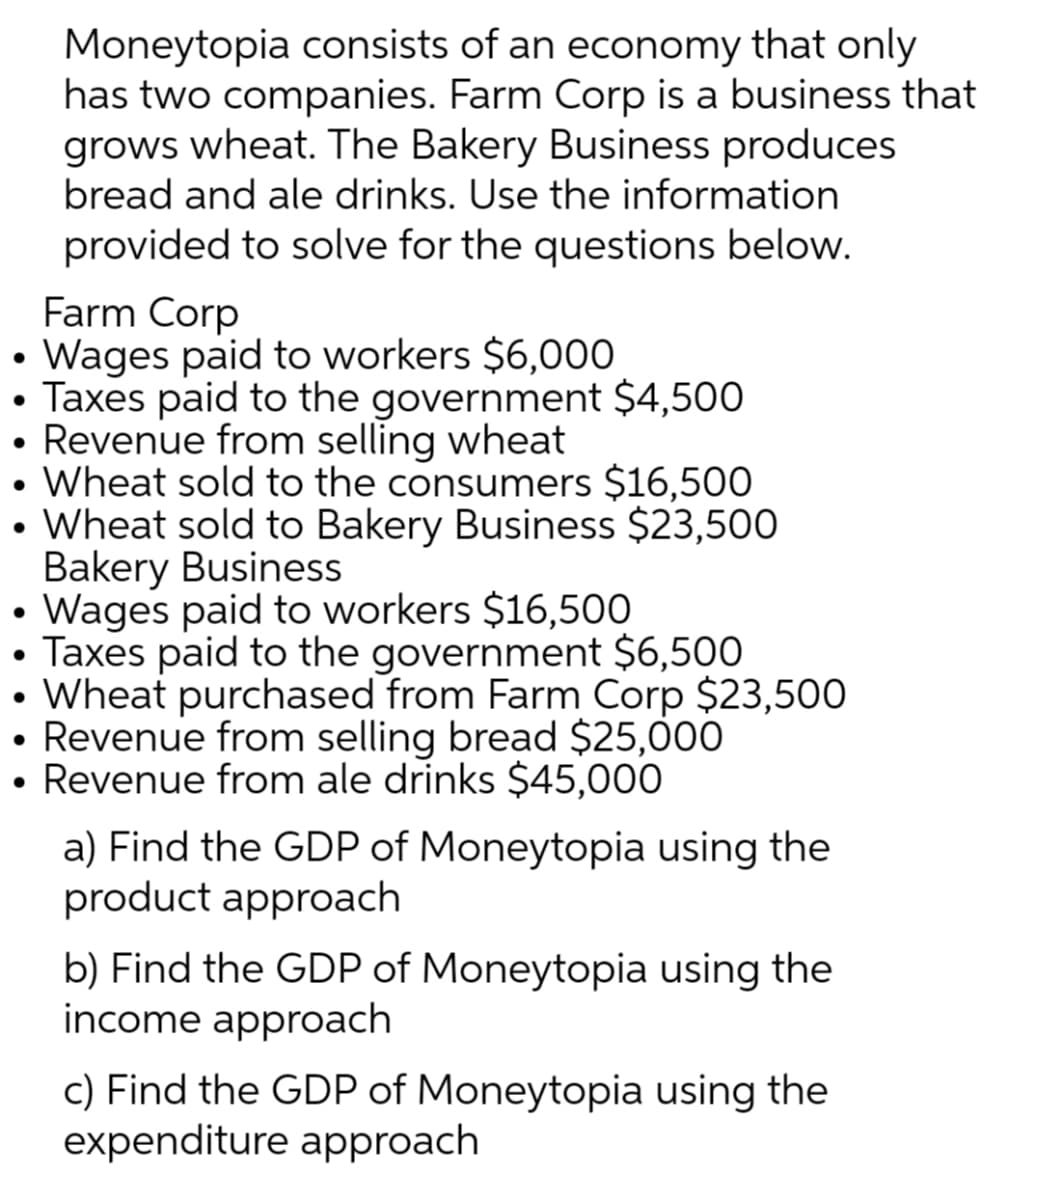 Moneytopia consists of an economy that only
has two companies. Farm Corp is a business that
grows wheat. The Bakery Business produces
bread and ale drinks. Use the information
provided to solve for the questions below.
Farm Corp
• Wages paid to workers $6,000
• Taxes paid to the government $4,500
• Revenue from selling wheat
• Wheat sold to the consumers $16,500
• Wheat sold to Bakery Business $23,500
Bakery Business
• Wages paid to workers $16,500
Taxes paid to the government $6,500
Wheat purchased from Farm Corp $23,500
• Revenue from selling bread $25,000
• Revenue from ale drinks $45,000
a) Find the GDP of Moneytopia using the
product approach
b) Find the GDP of Moneytopia using the
income approach
c) Find the GDP of Moneytopia using the
expenditure approach
